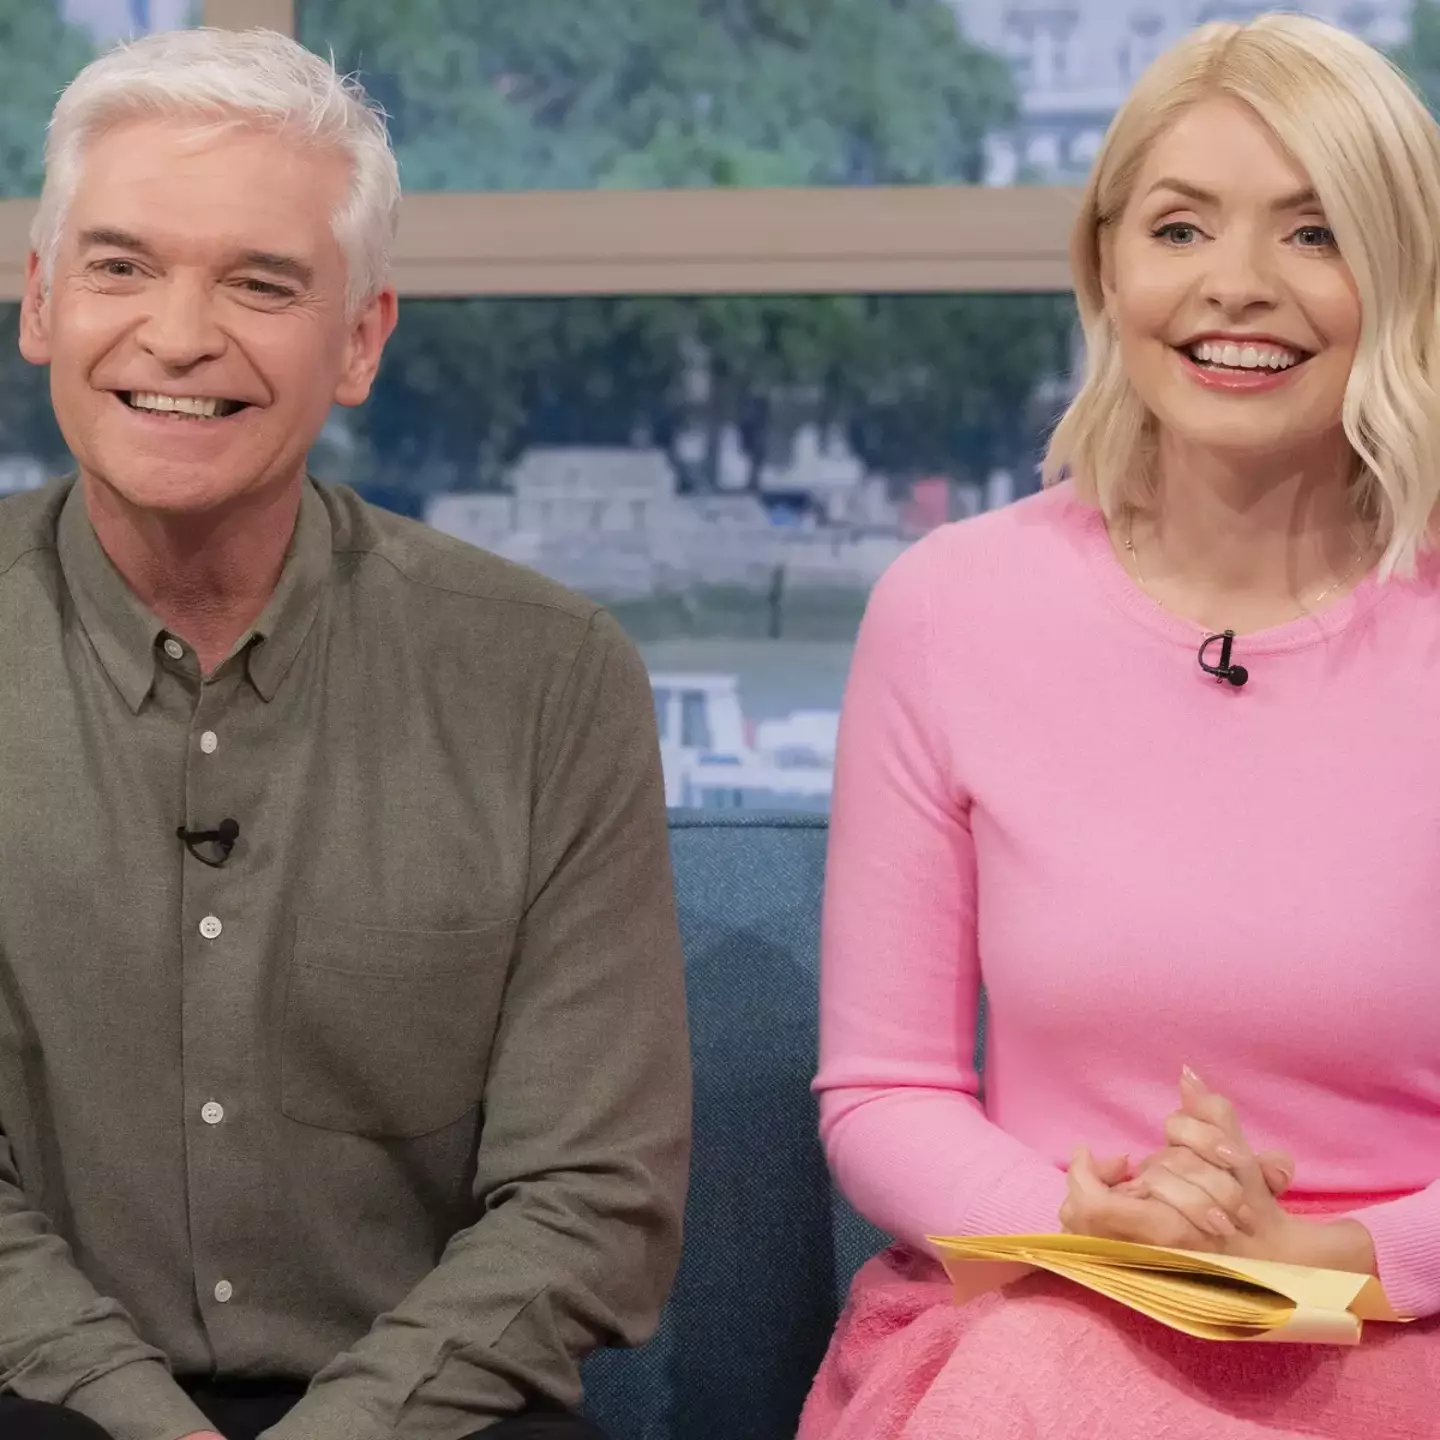 Holly previously hosted This Morning alongside Phillip Schofield.